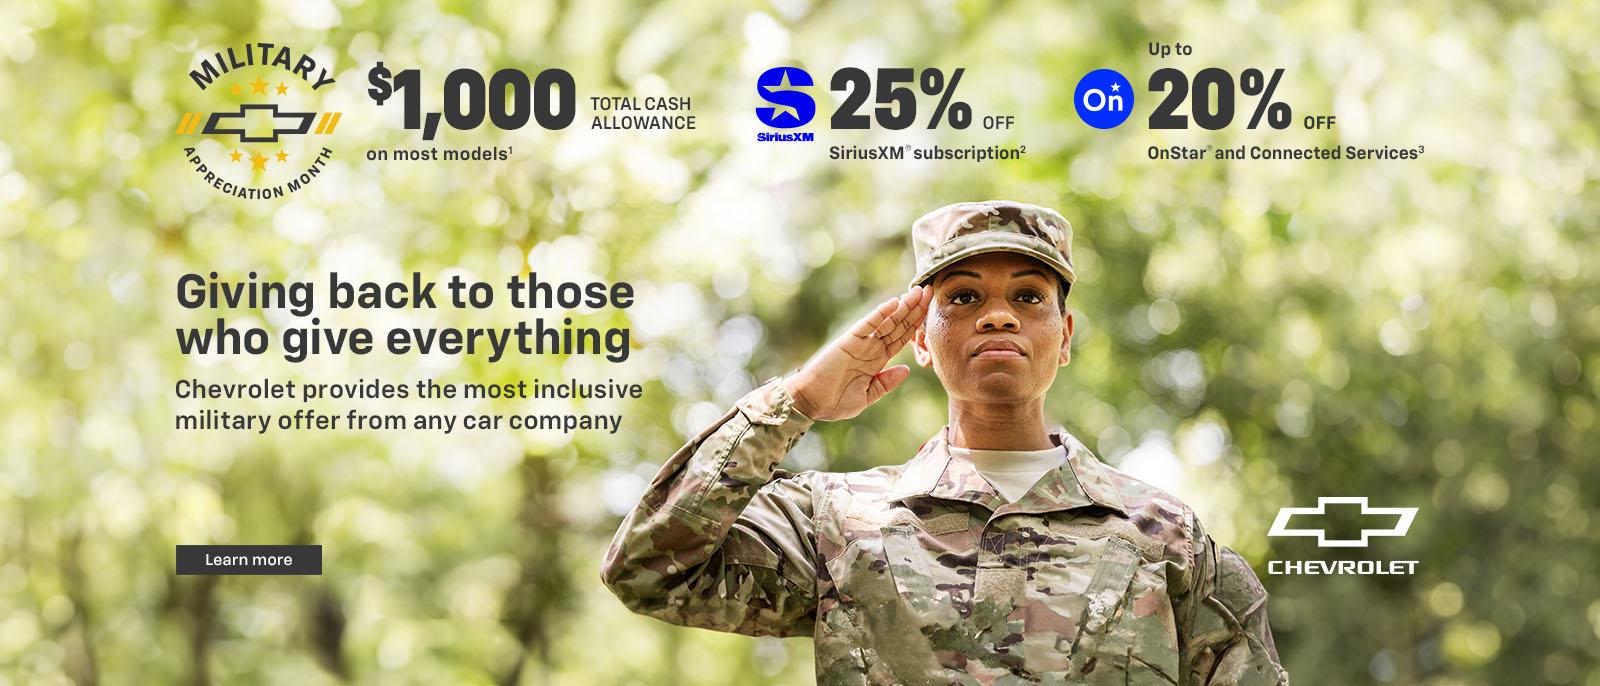 Giving back to those who give everything. Chevrolet offers the most inclusive military offer from any car company. $1,000 total cash allowance on most models. 25% off SiriusXM Subscription. Up to 20% off OnStar & Connected Services.